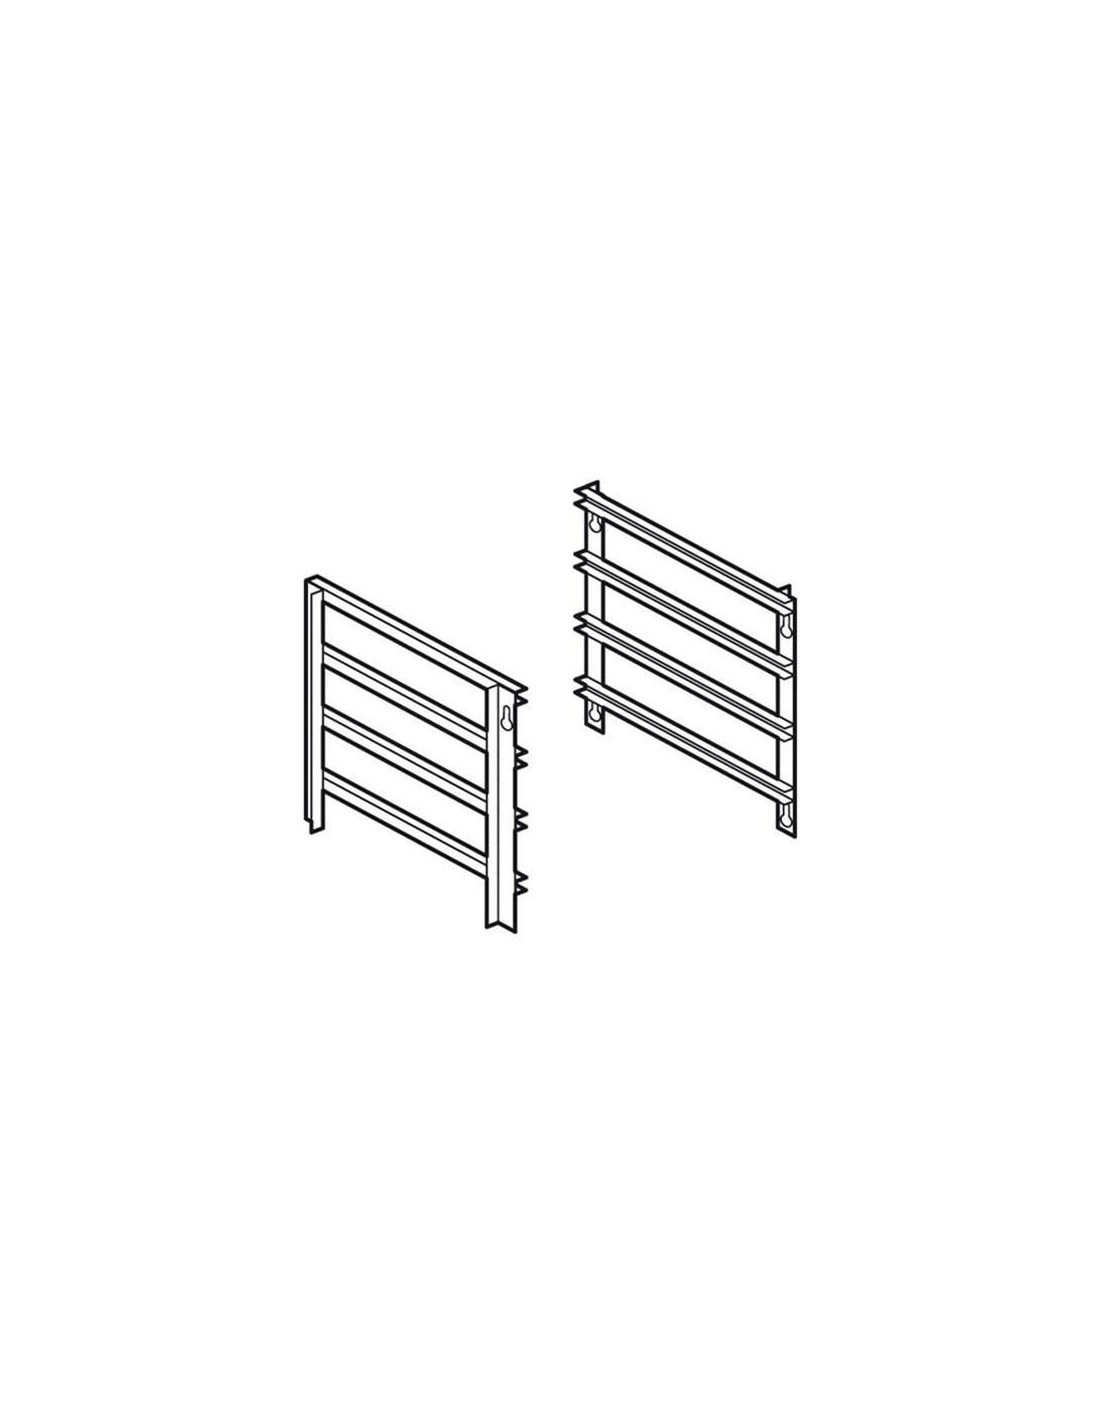 Doors for compartment and worktop - No. 4 floors - Interasse cm 7